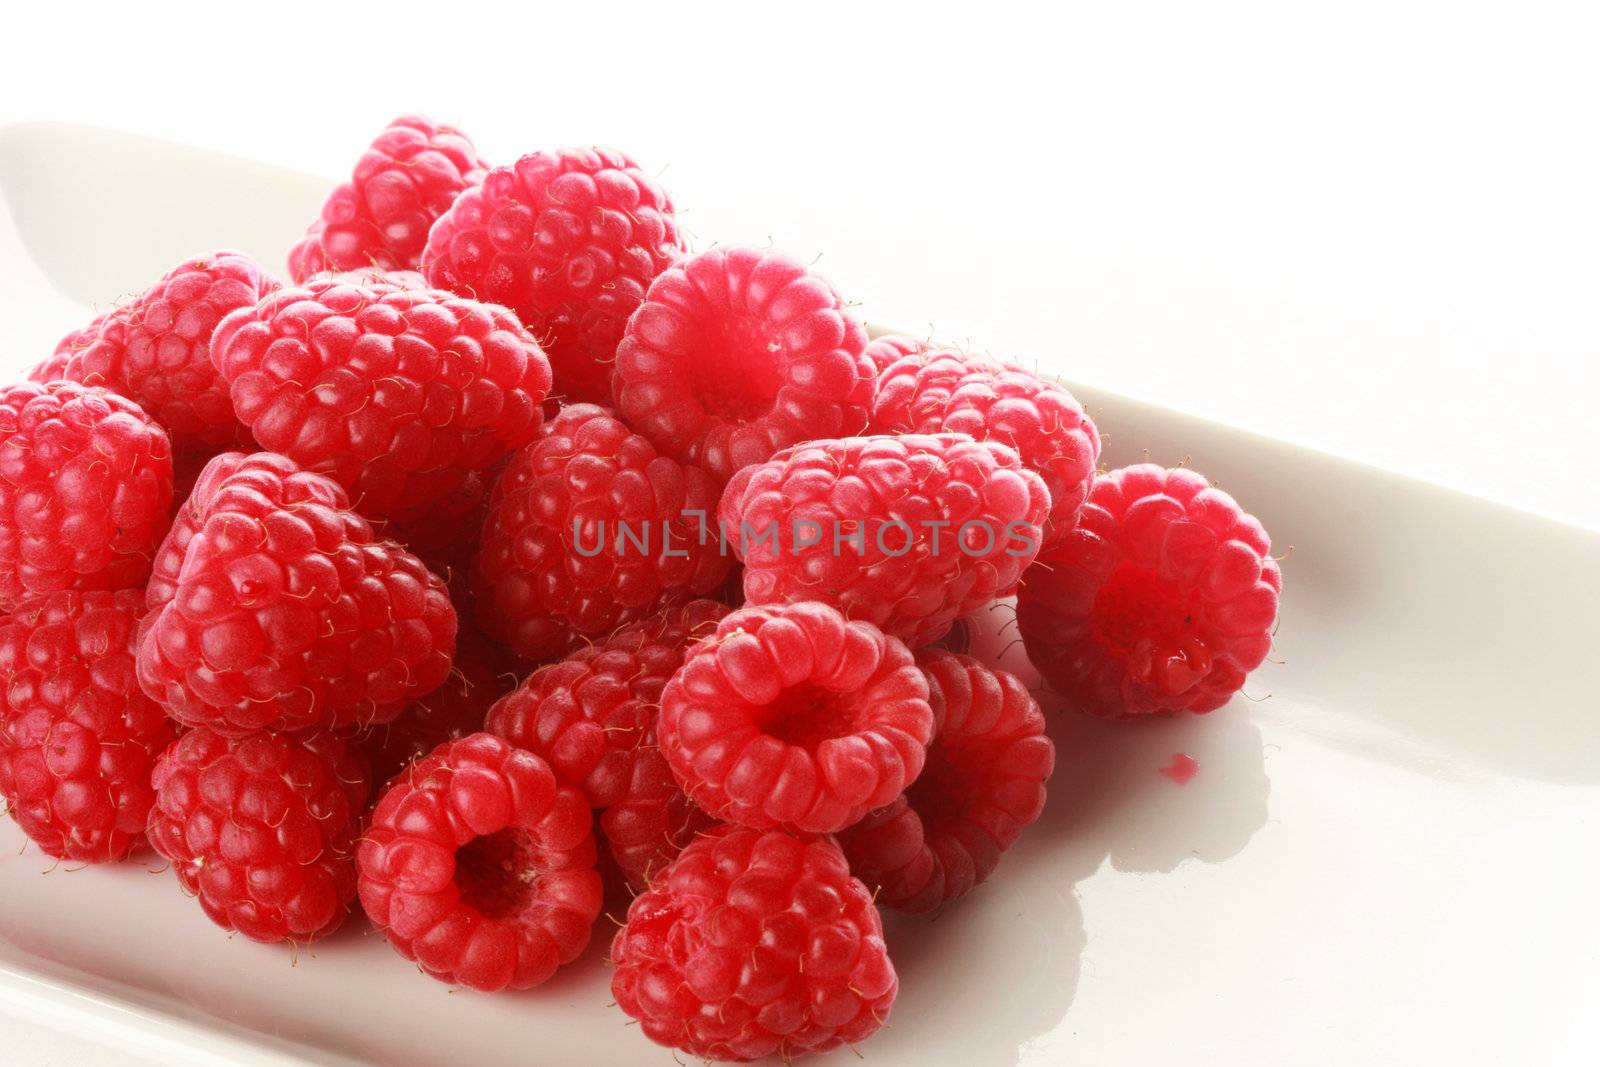 pile of raspberries on a white dish, isolated on white